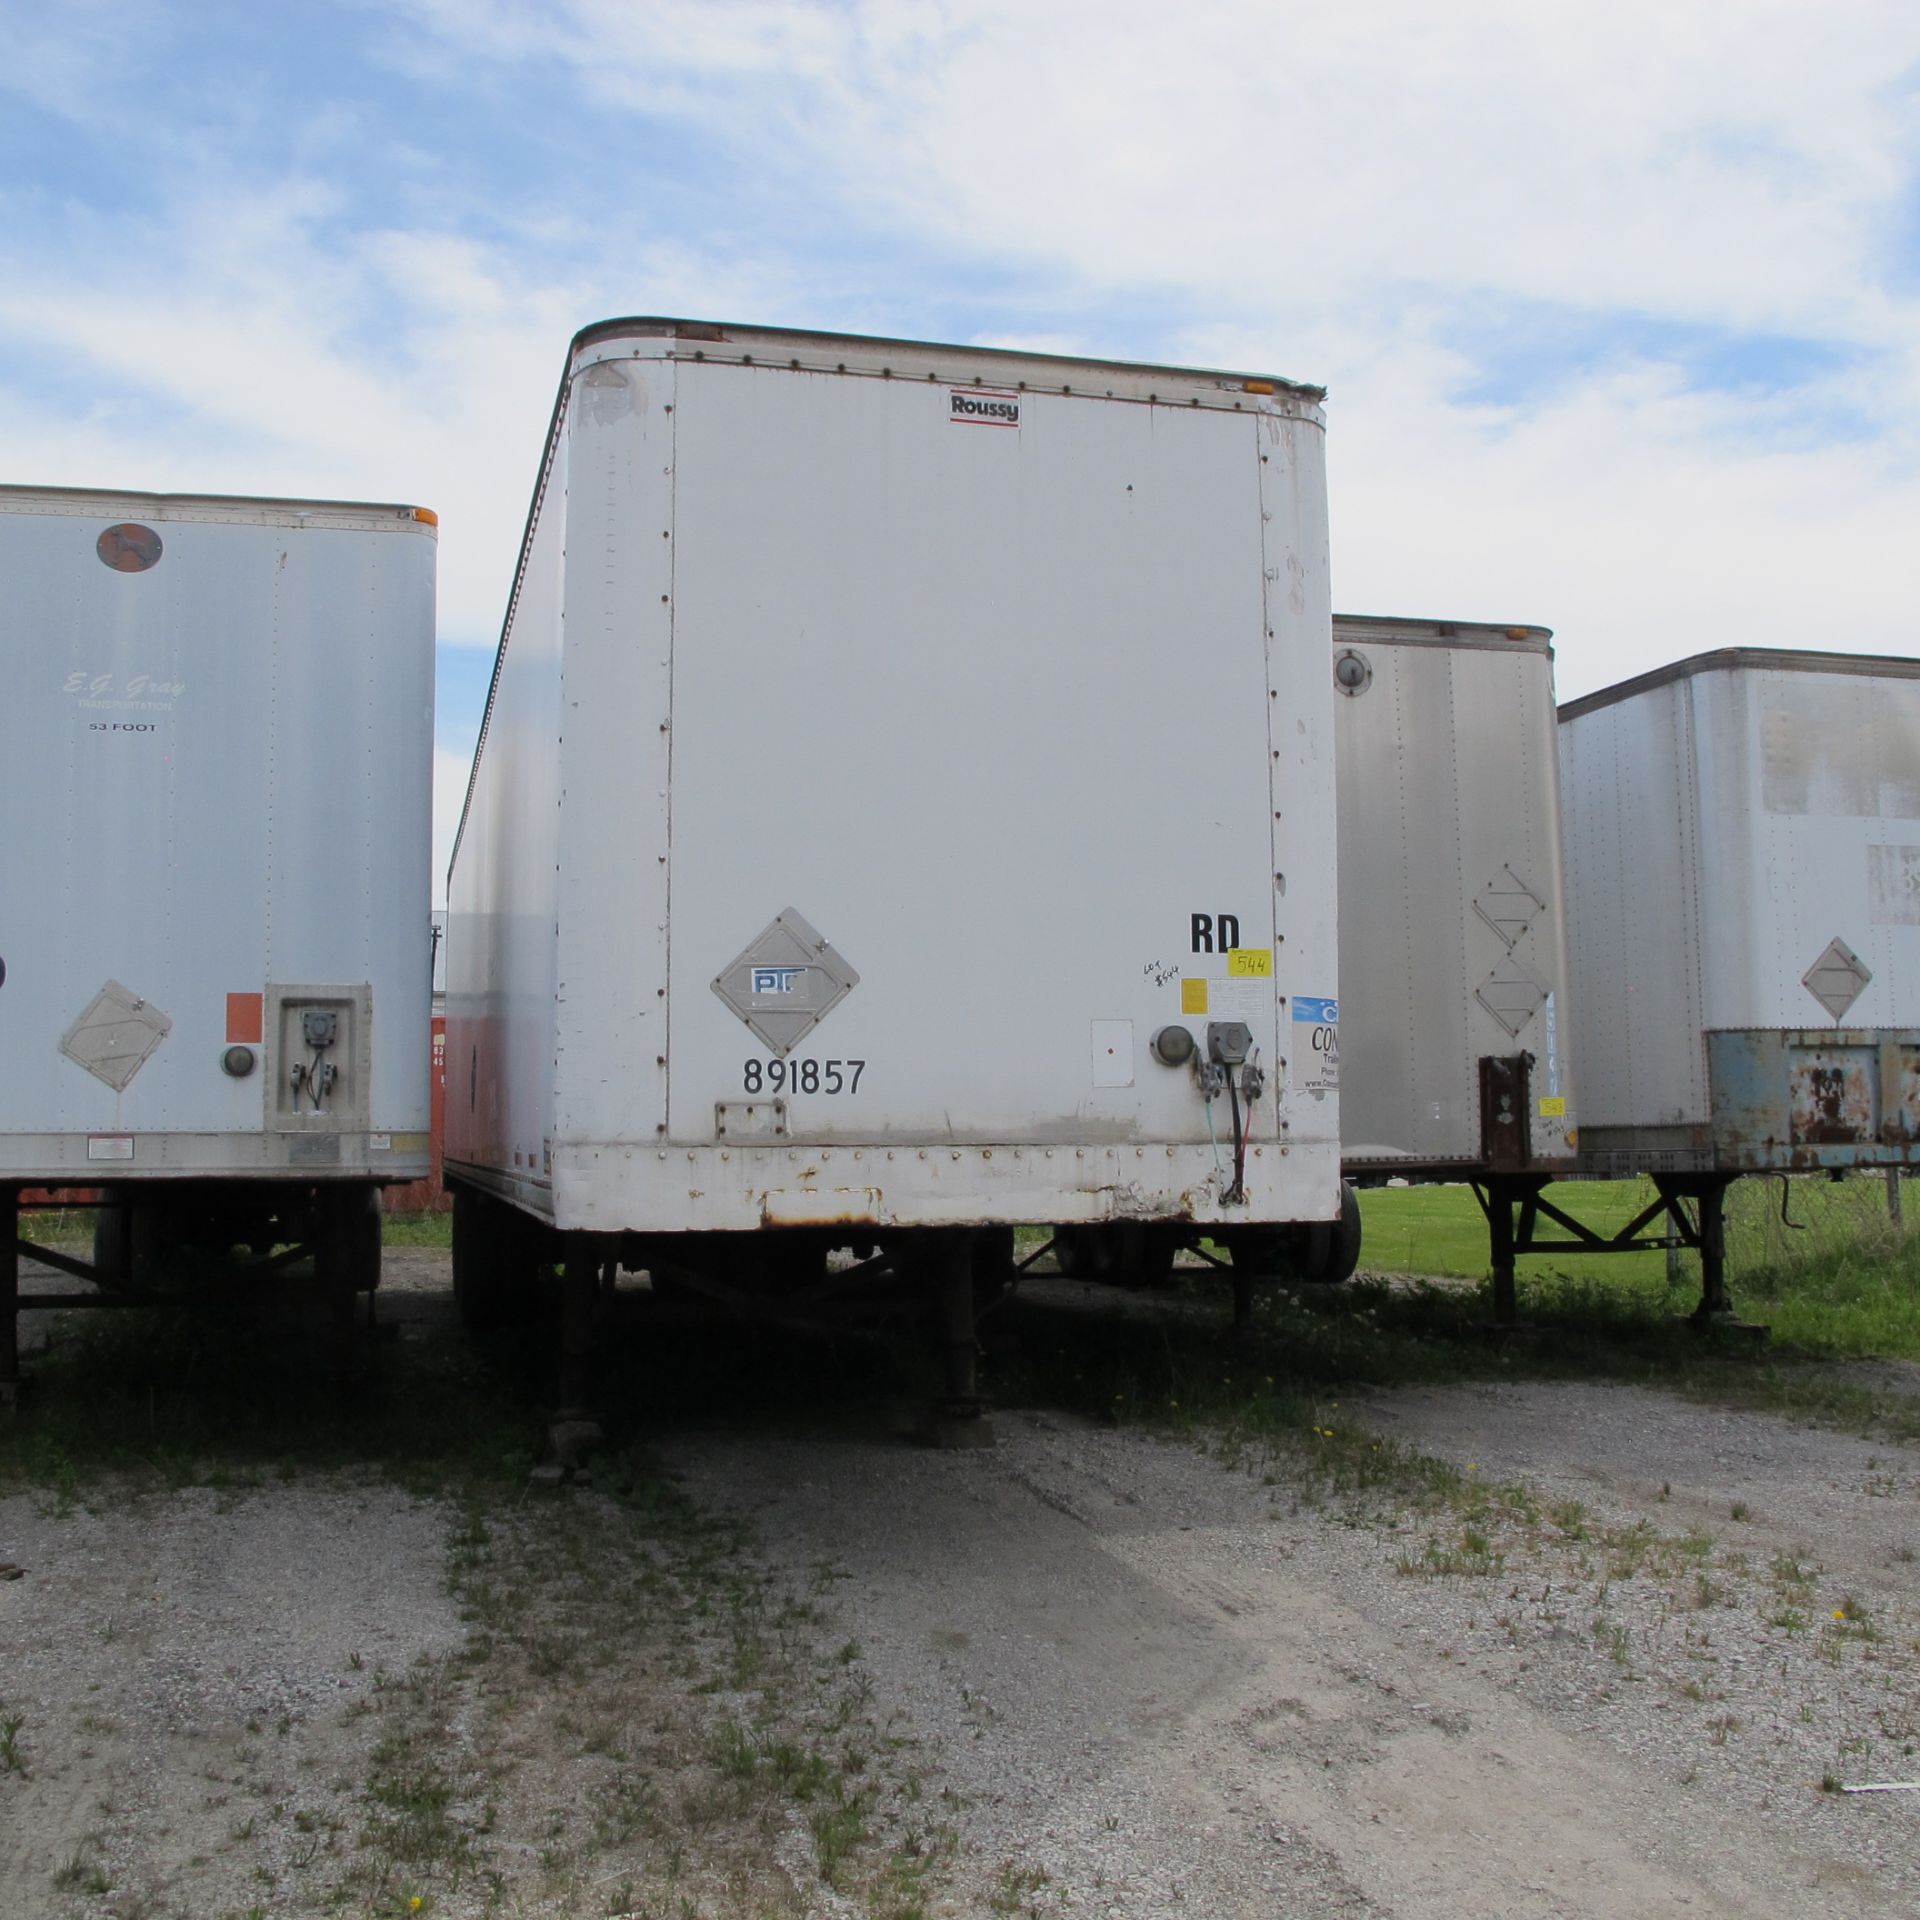 1997 ROUSSY 53' STORAGE TRAILER (NOT ROADWORTHY, NO OWNERSHIP TO BE PROVIDED) - Image 2 of 3